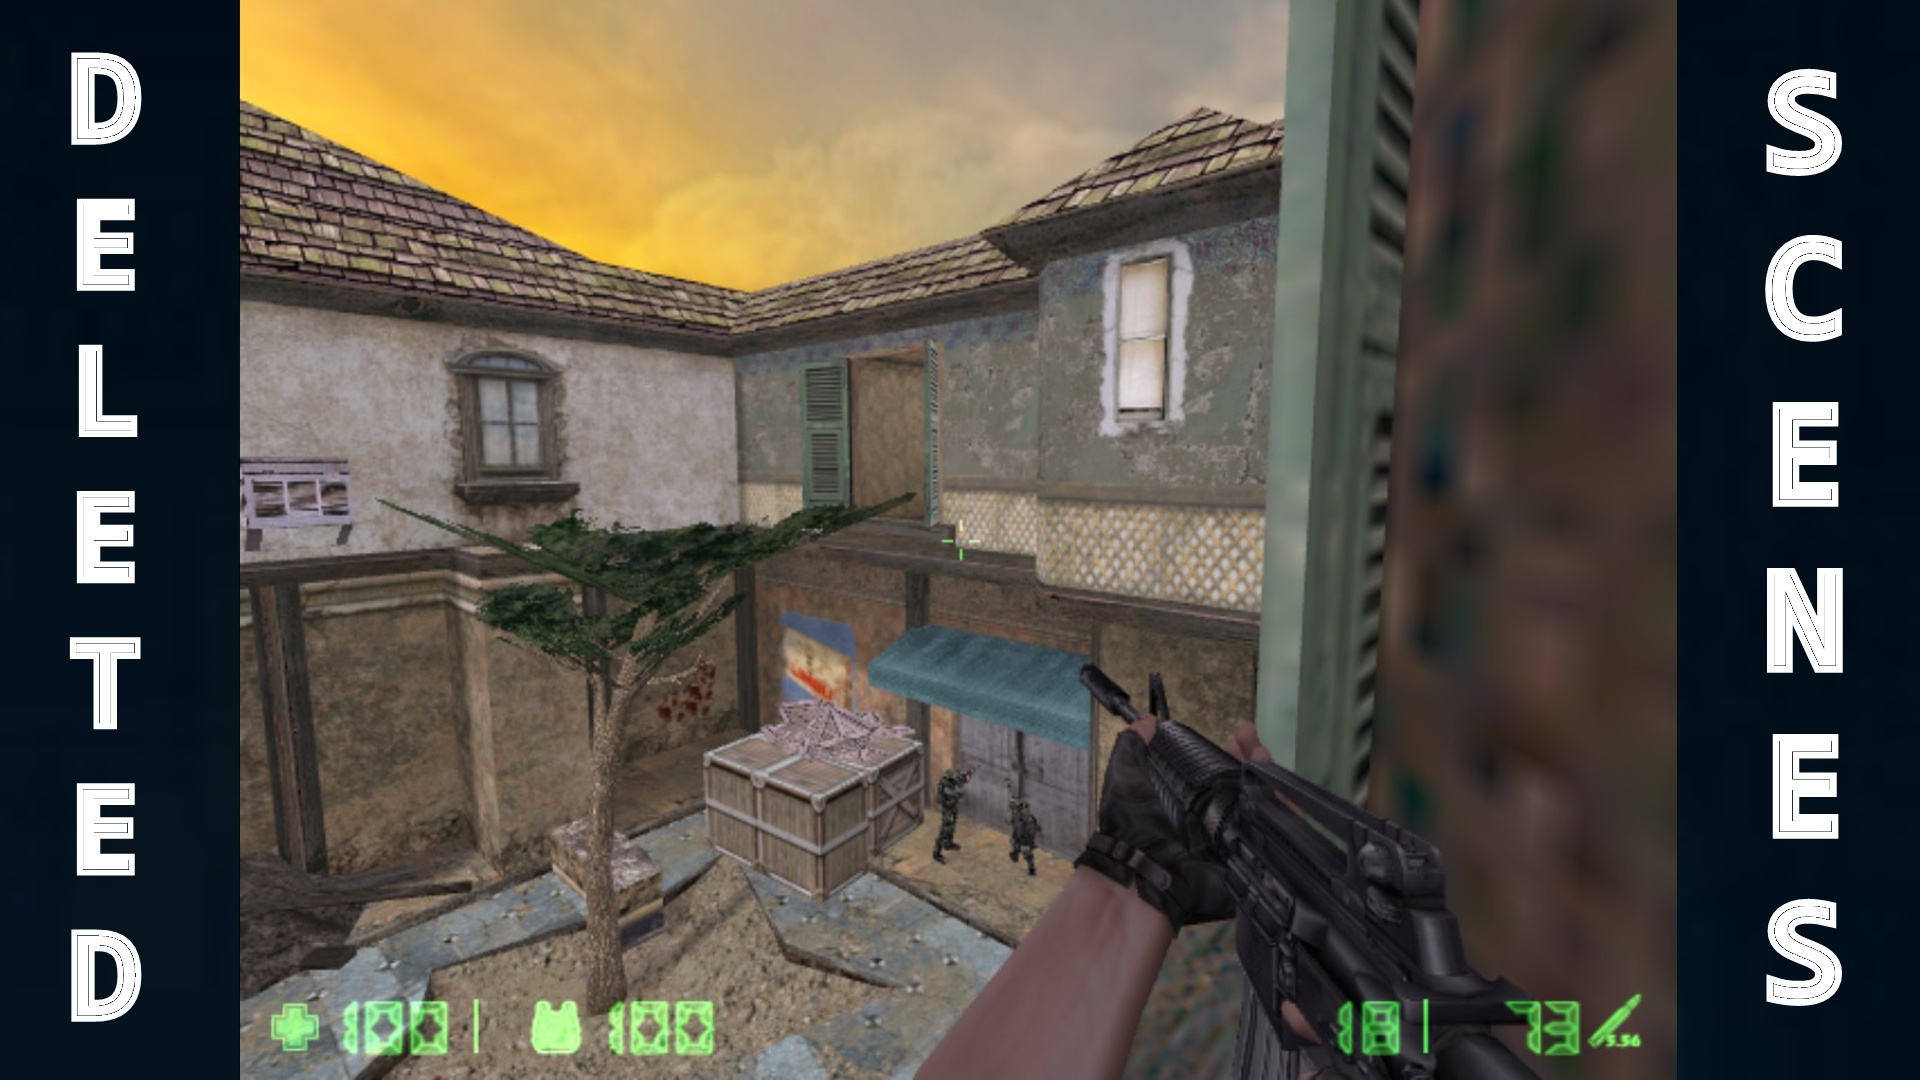 Counter-Strike: Condition Zero Deleted Scenes Easter Egg - The